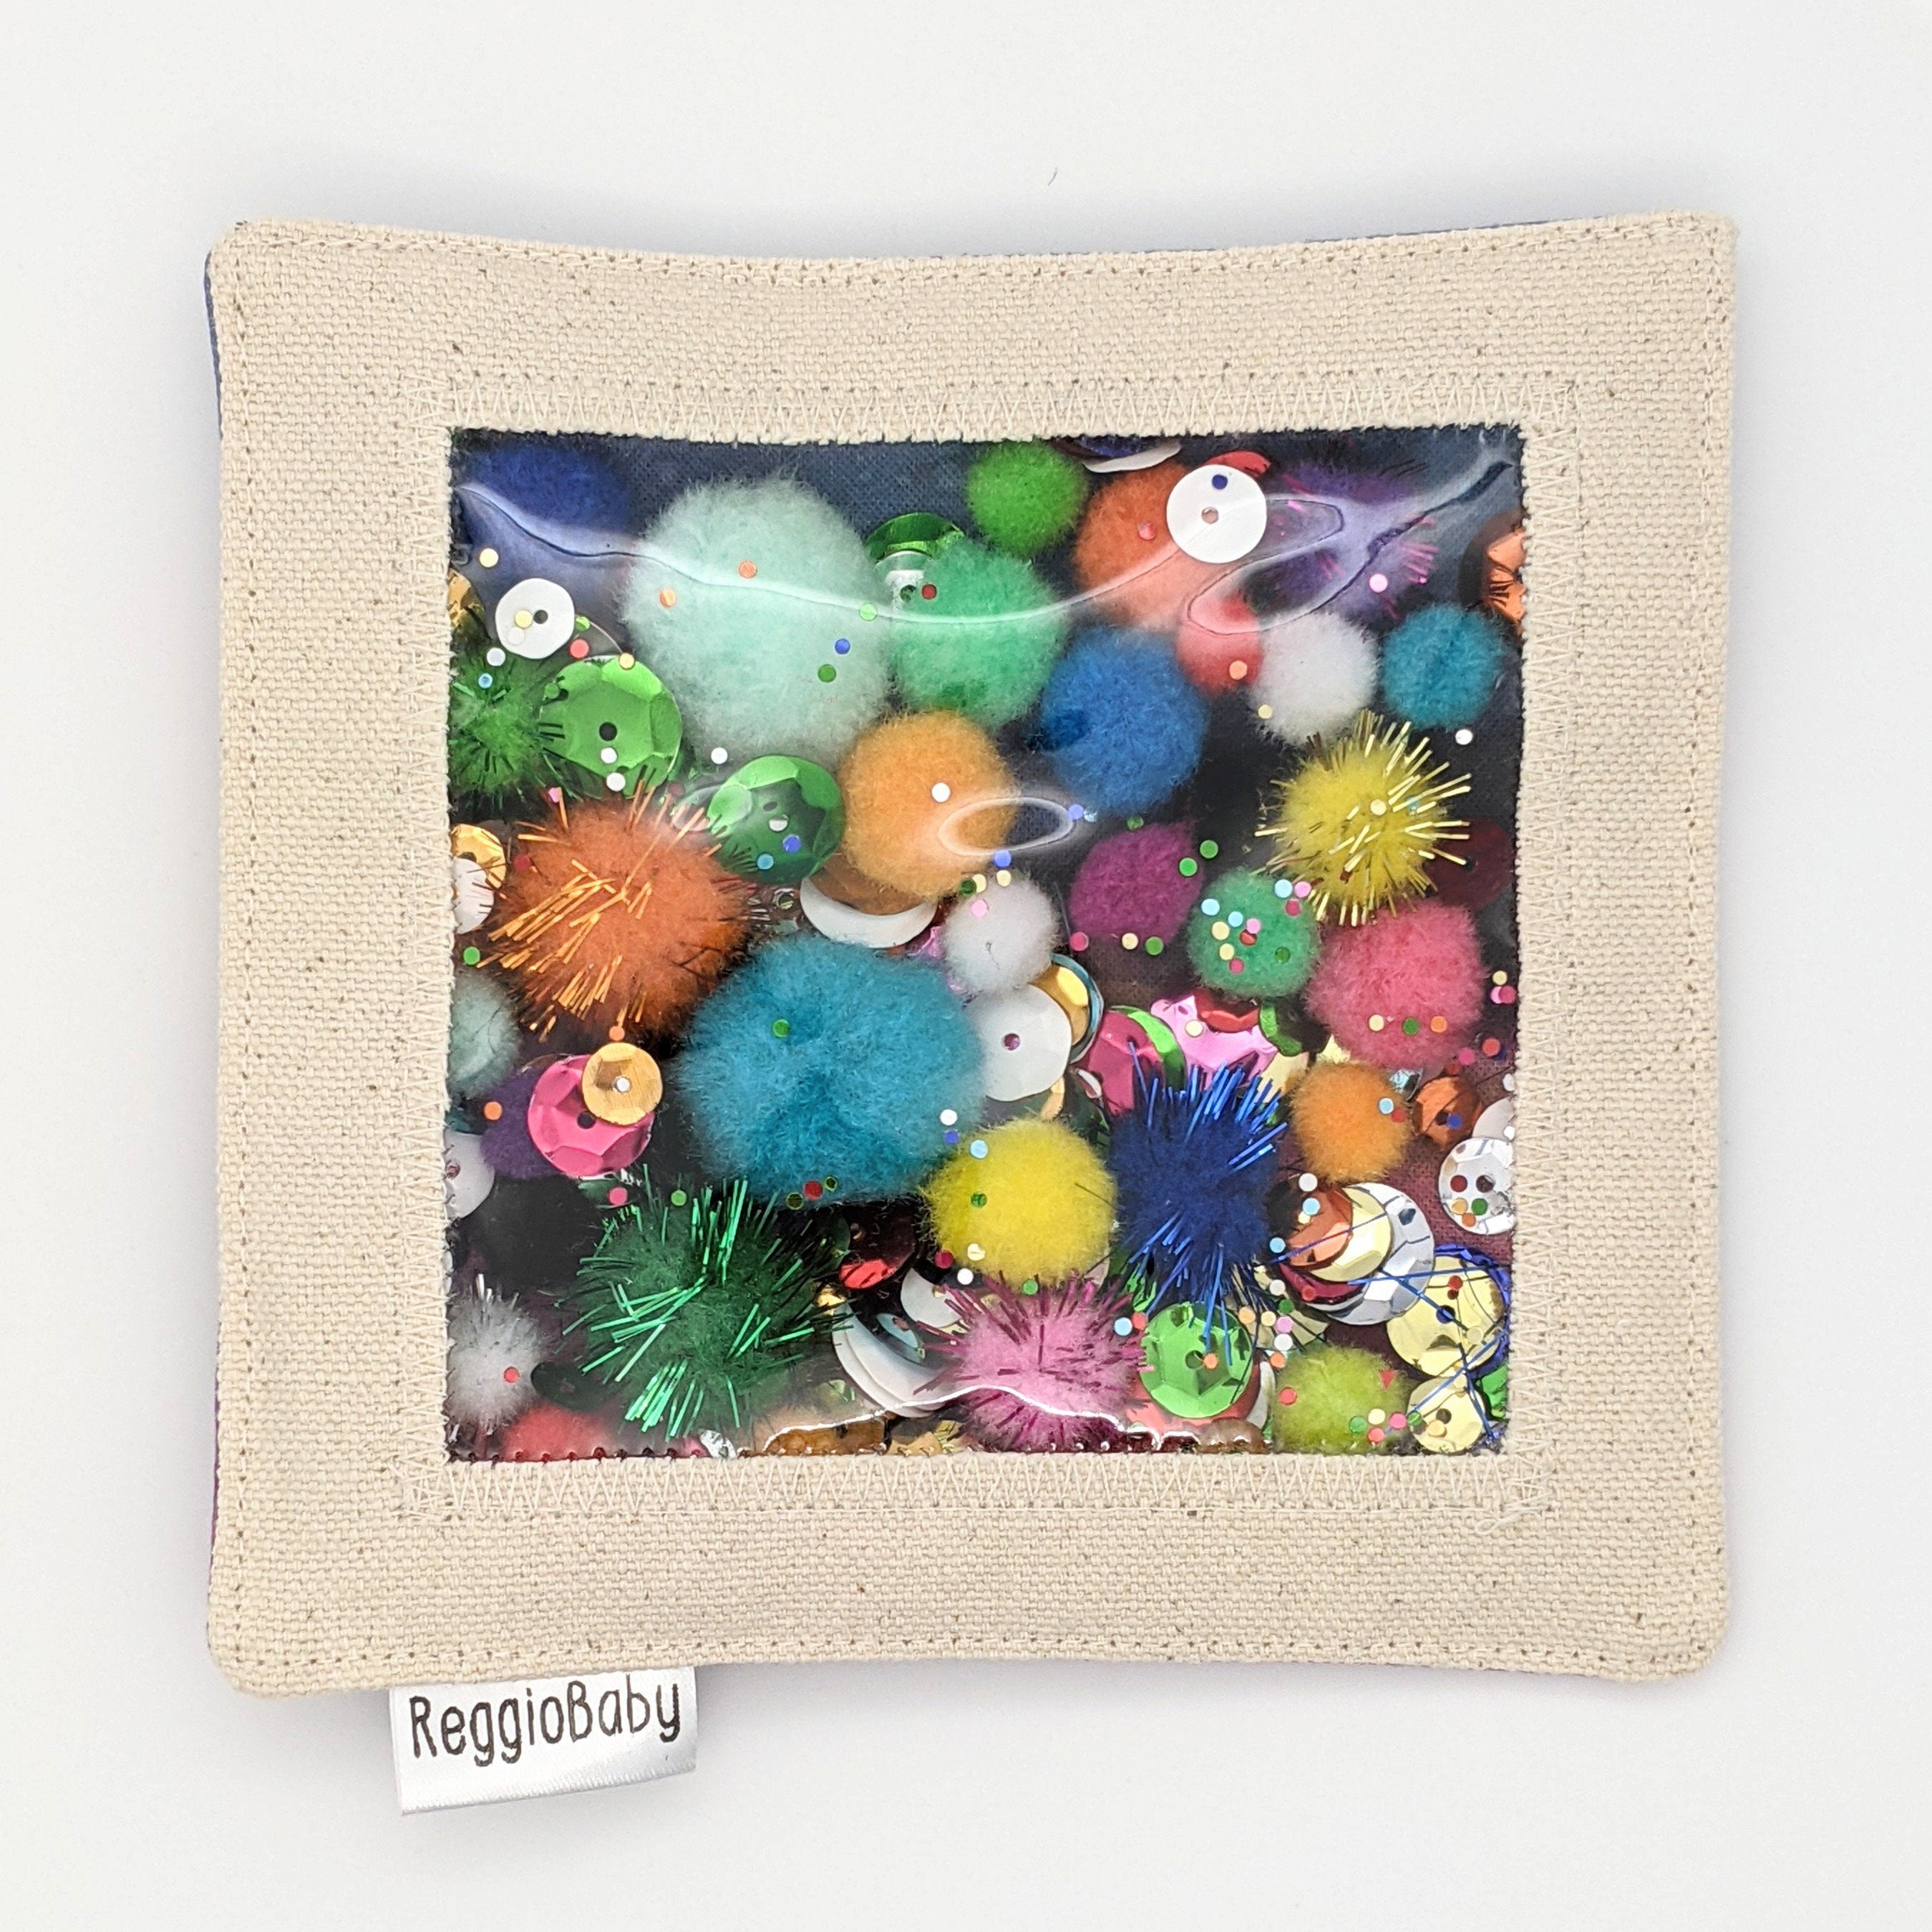 Large Sensory Toy with Sequins and Pom Poms